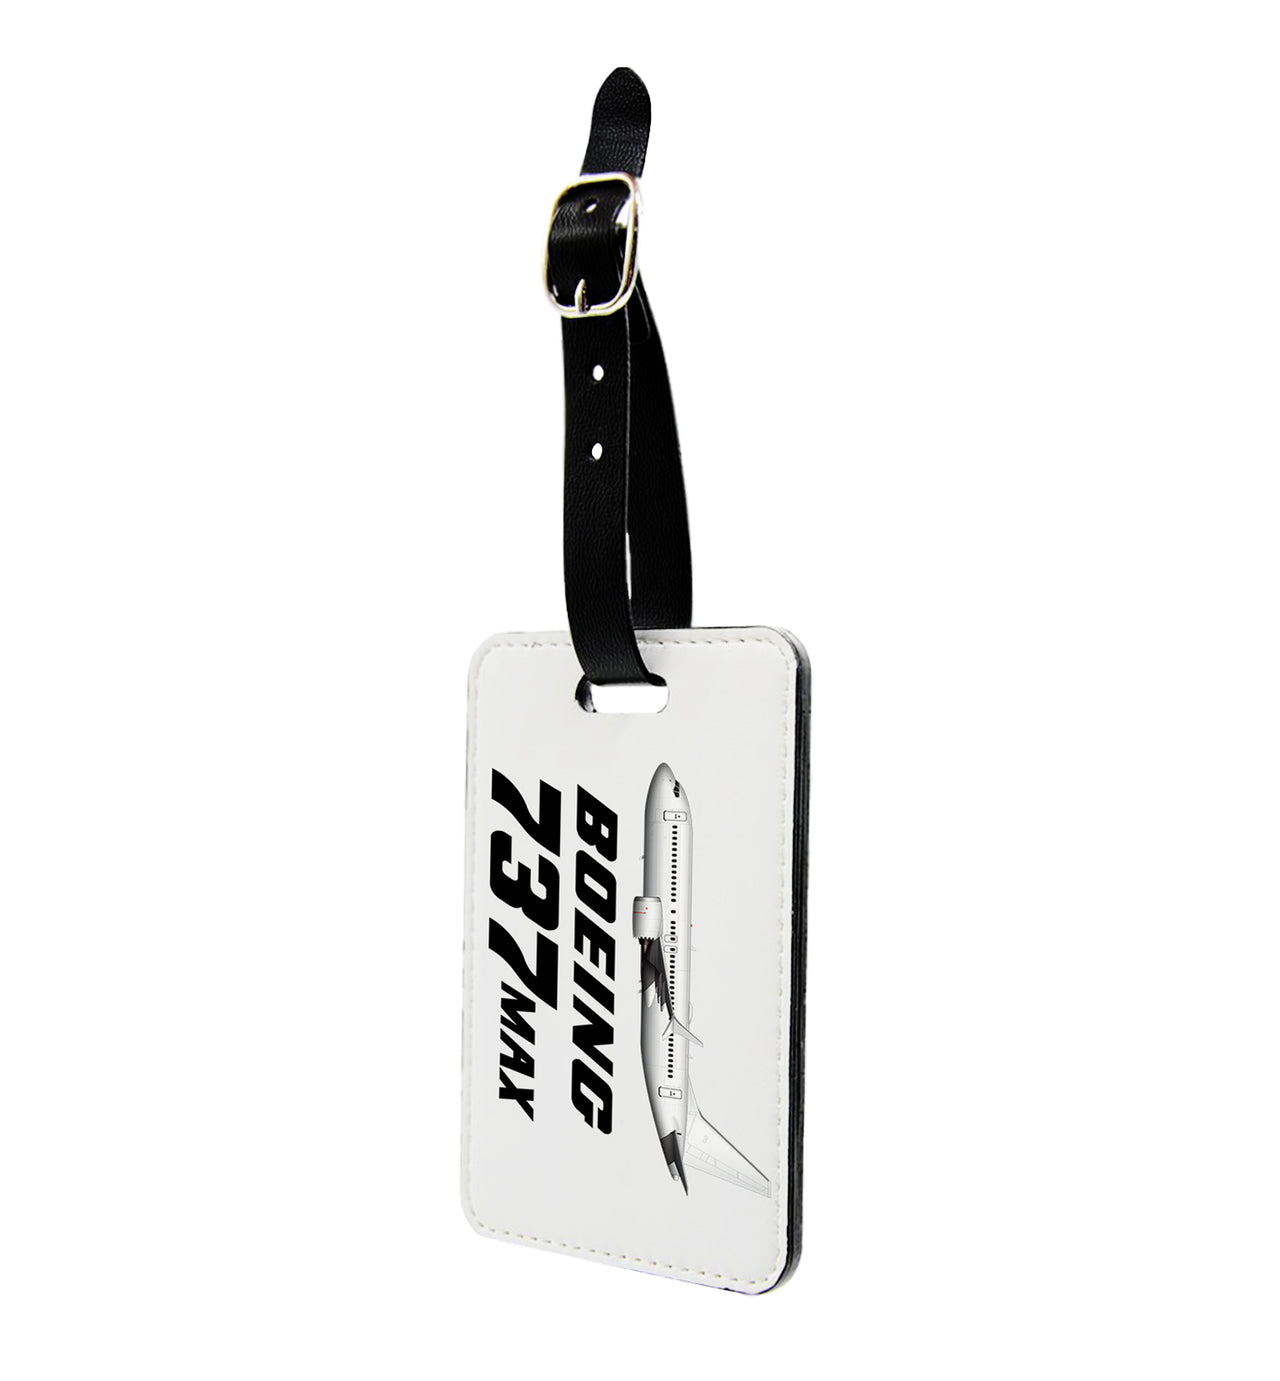 The Boeing 737Max Designed Luggage Tag